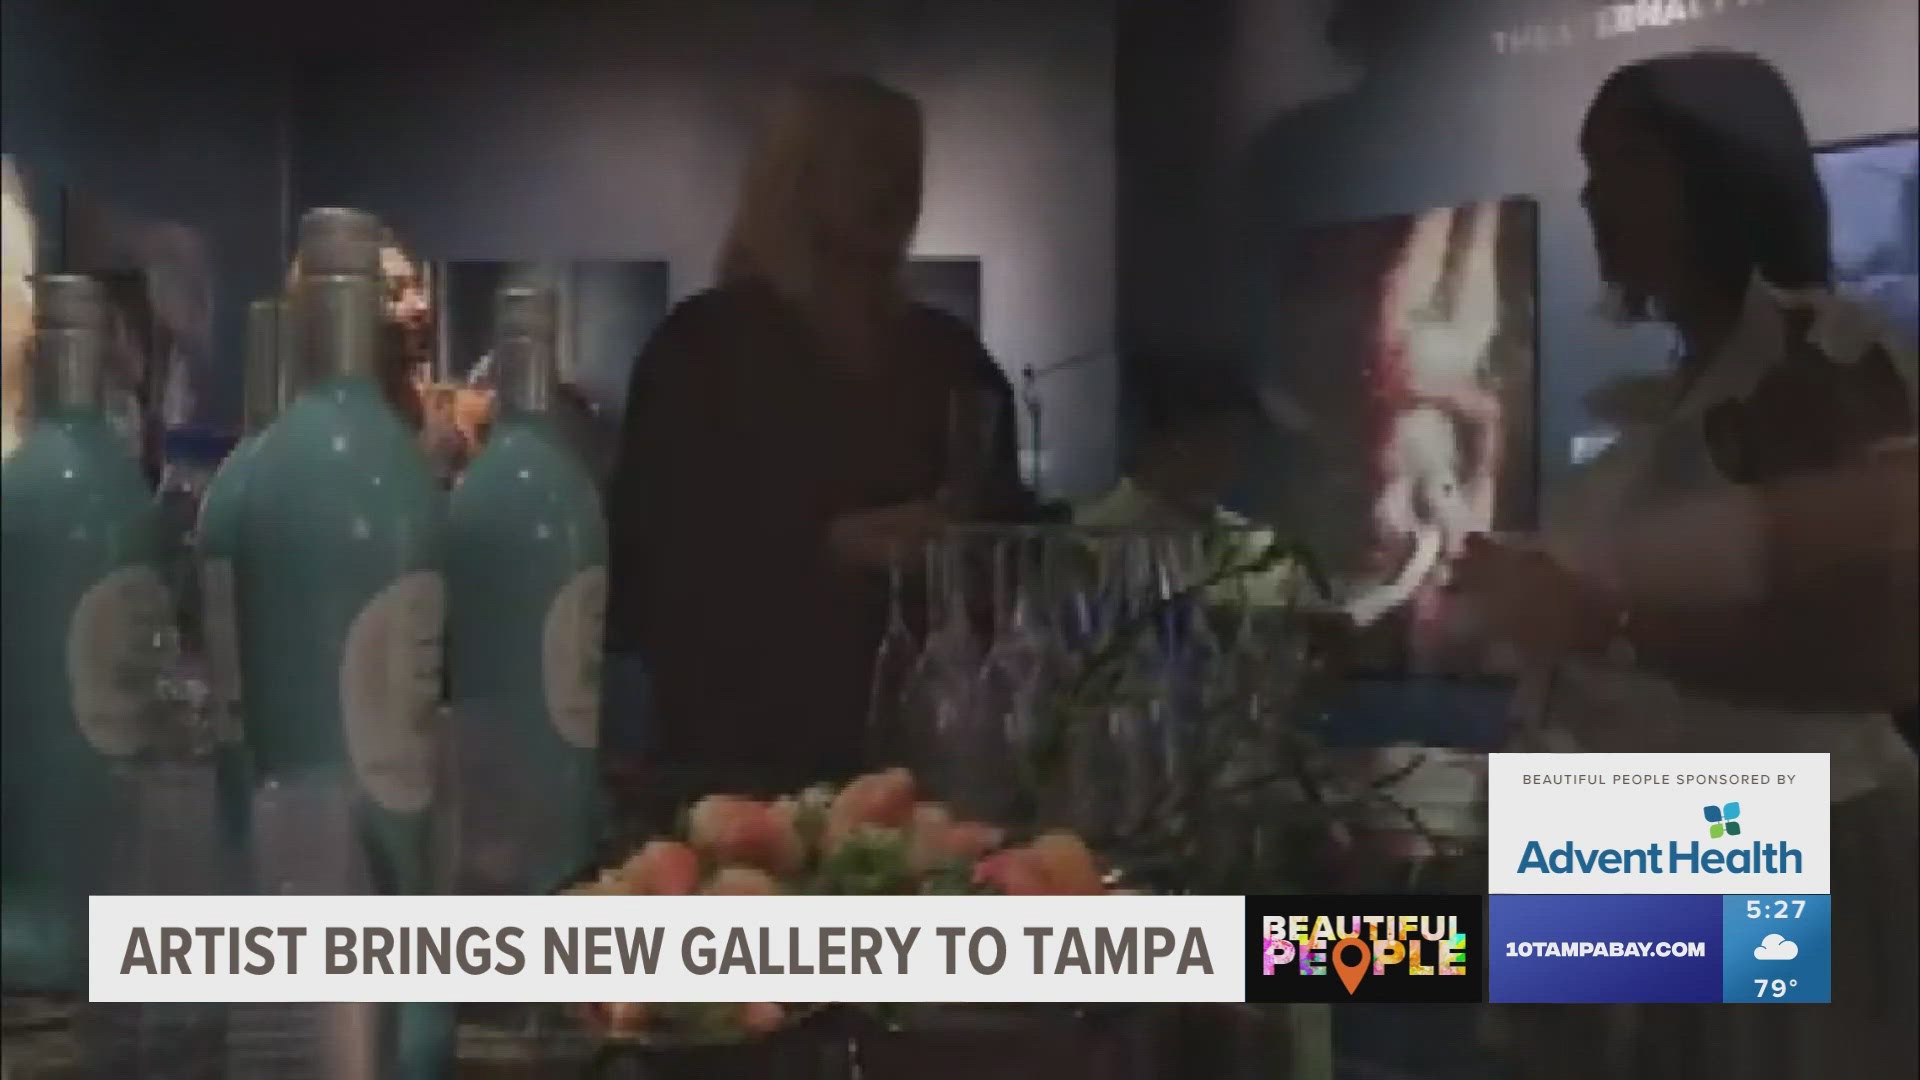 A local artist opened a gallery in Ybor City to give under-recognized artists a place to share their voices.